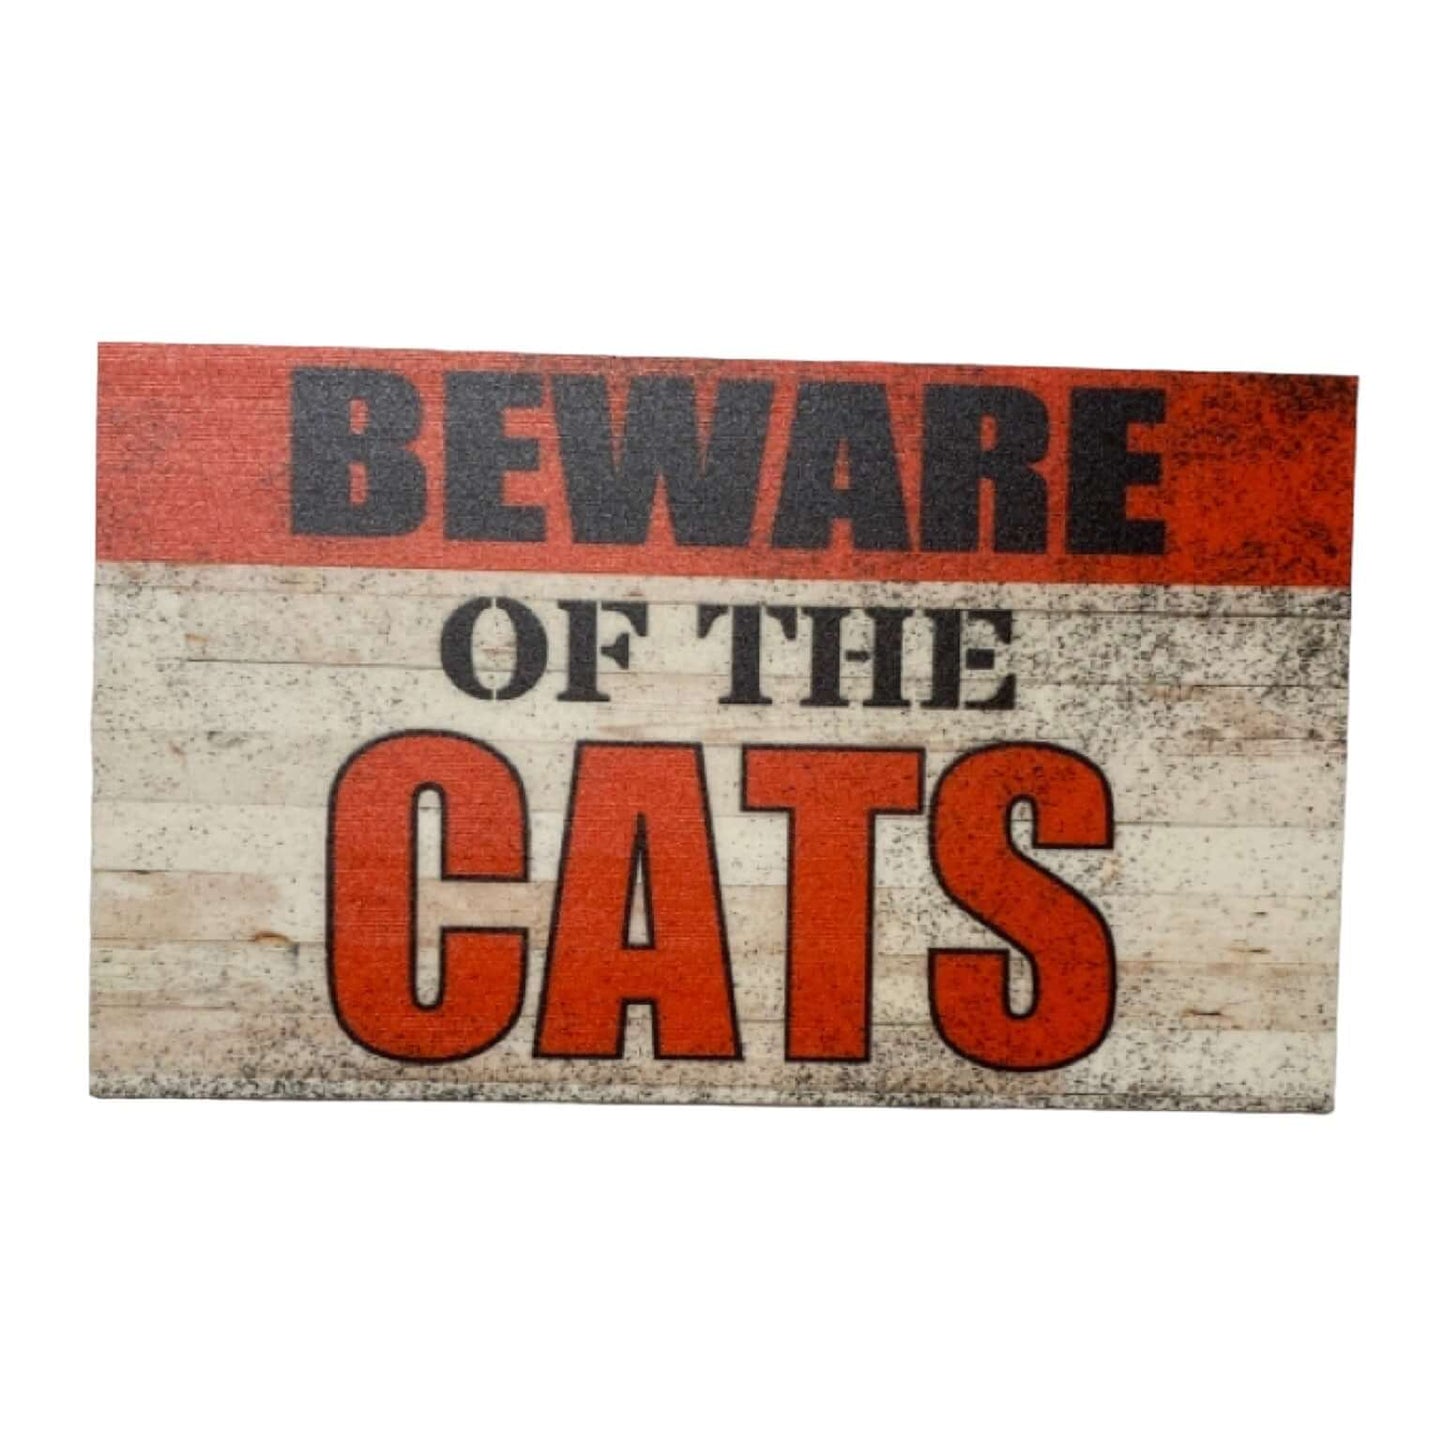 Beware Of The Cat or Cats Red Sign - The Renmy Store Homewares & Gifts 